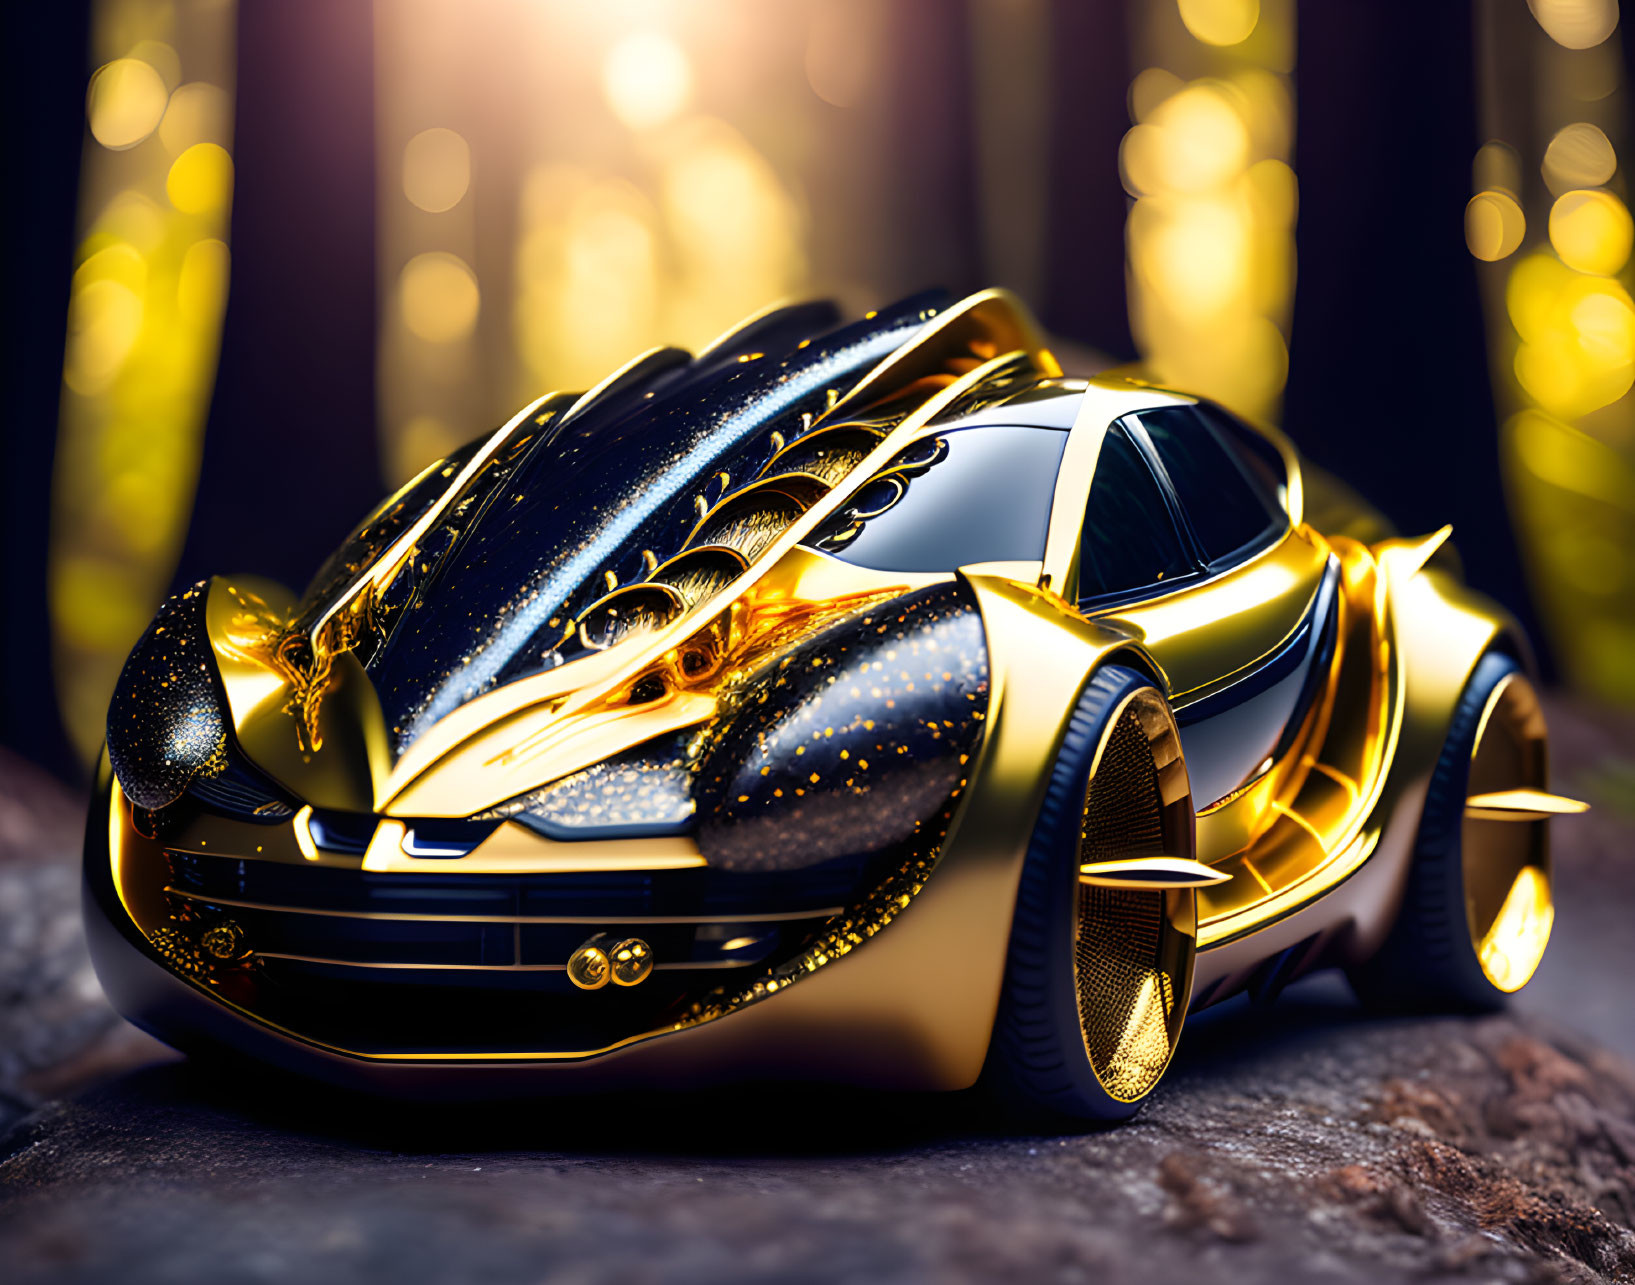 Luxurious Gold and Black Sports Car with Intricate Designs and Dramatic Lighting Background